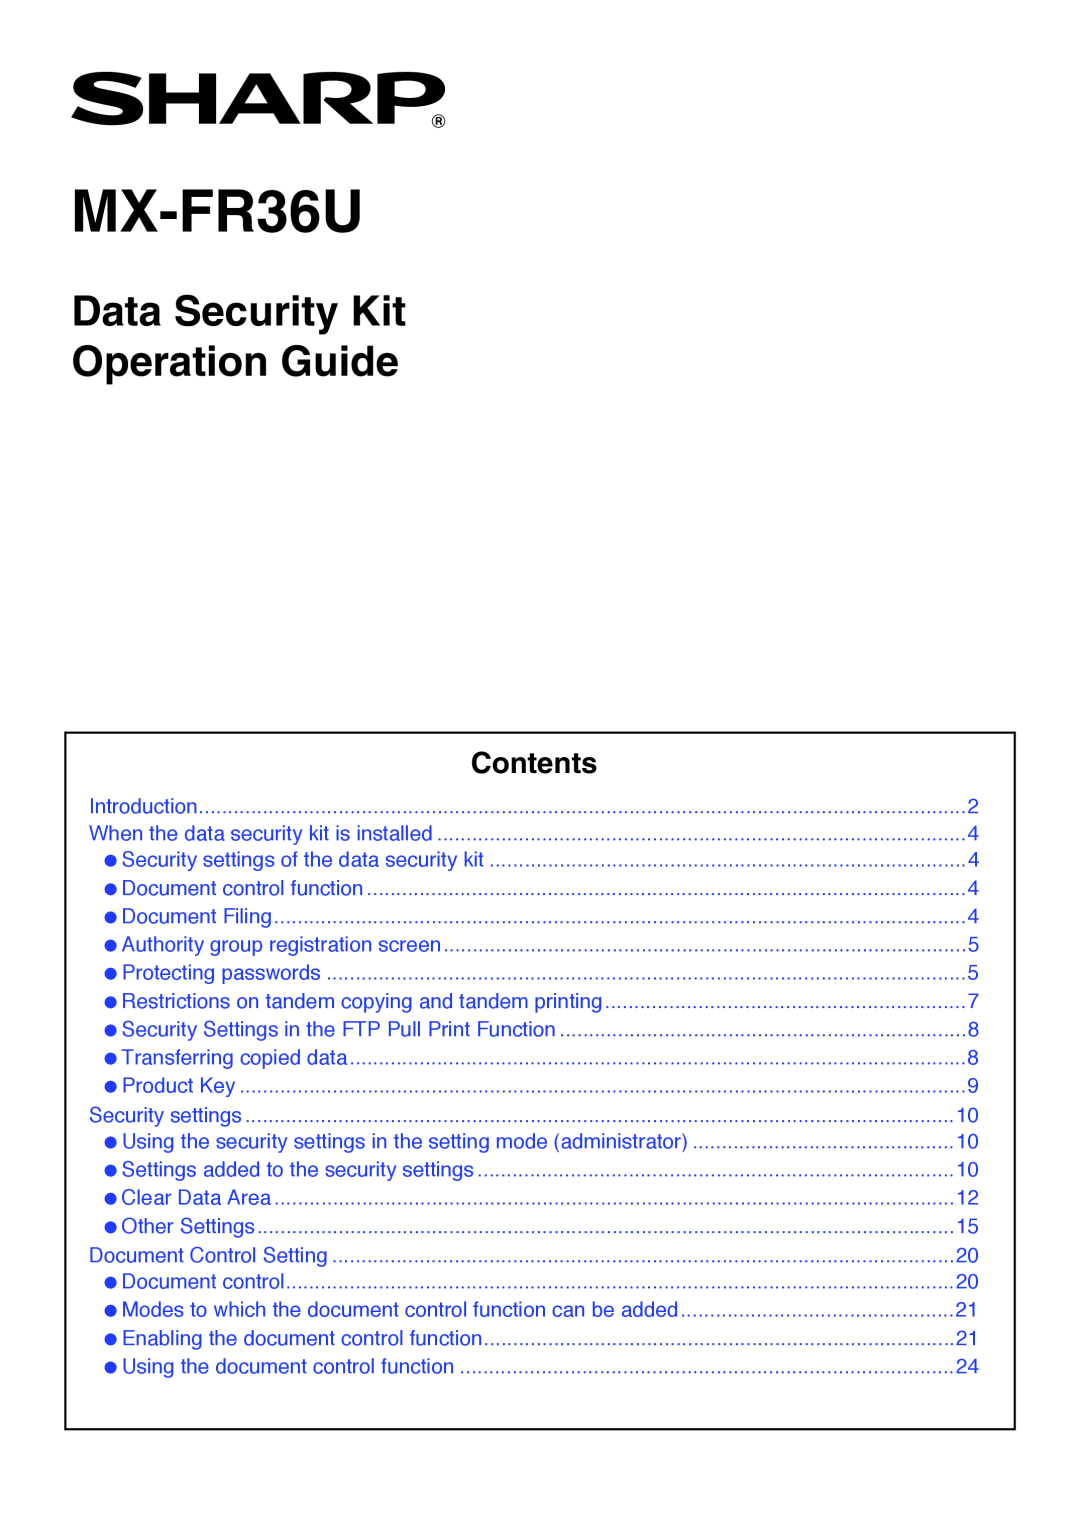 Sharp MX-FR36U manual Data Security Kit Operation Guide, Contents 